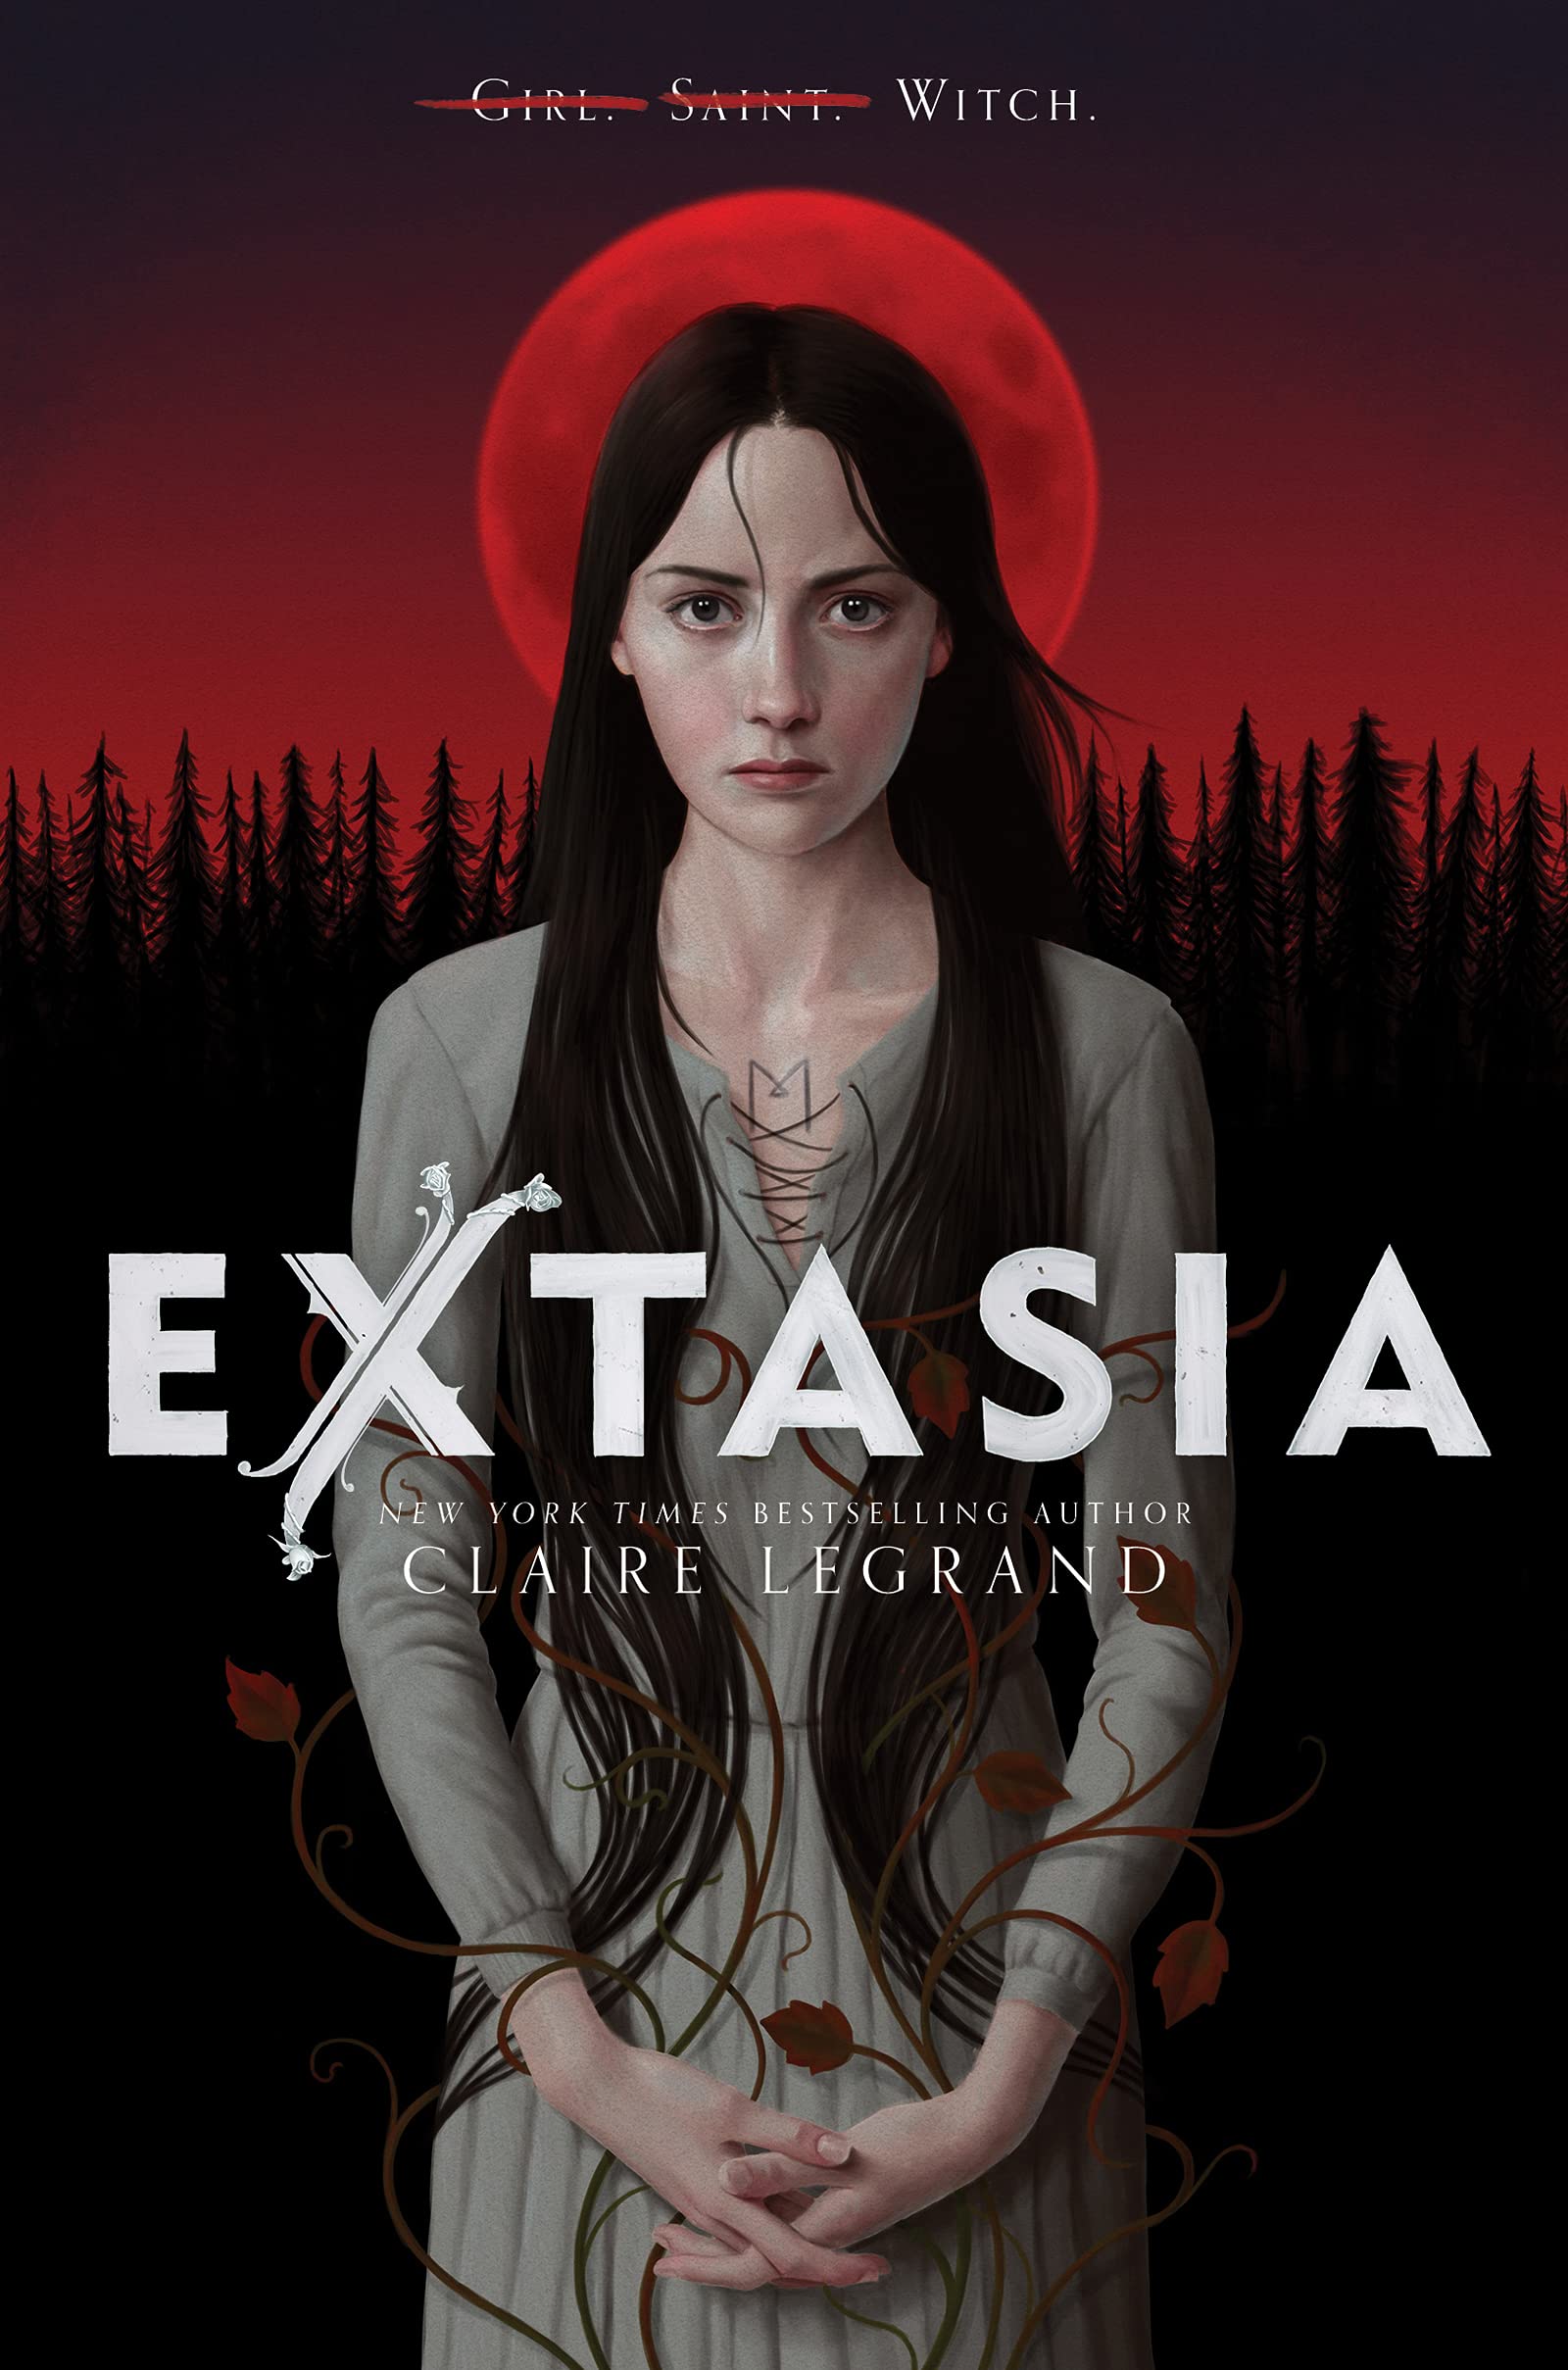 Cover of “Extasia” by Claire Legrand